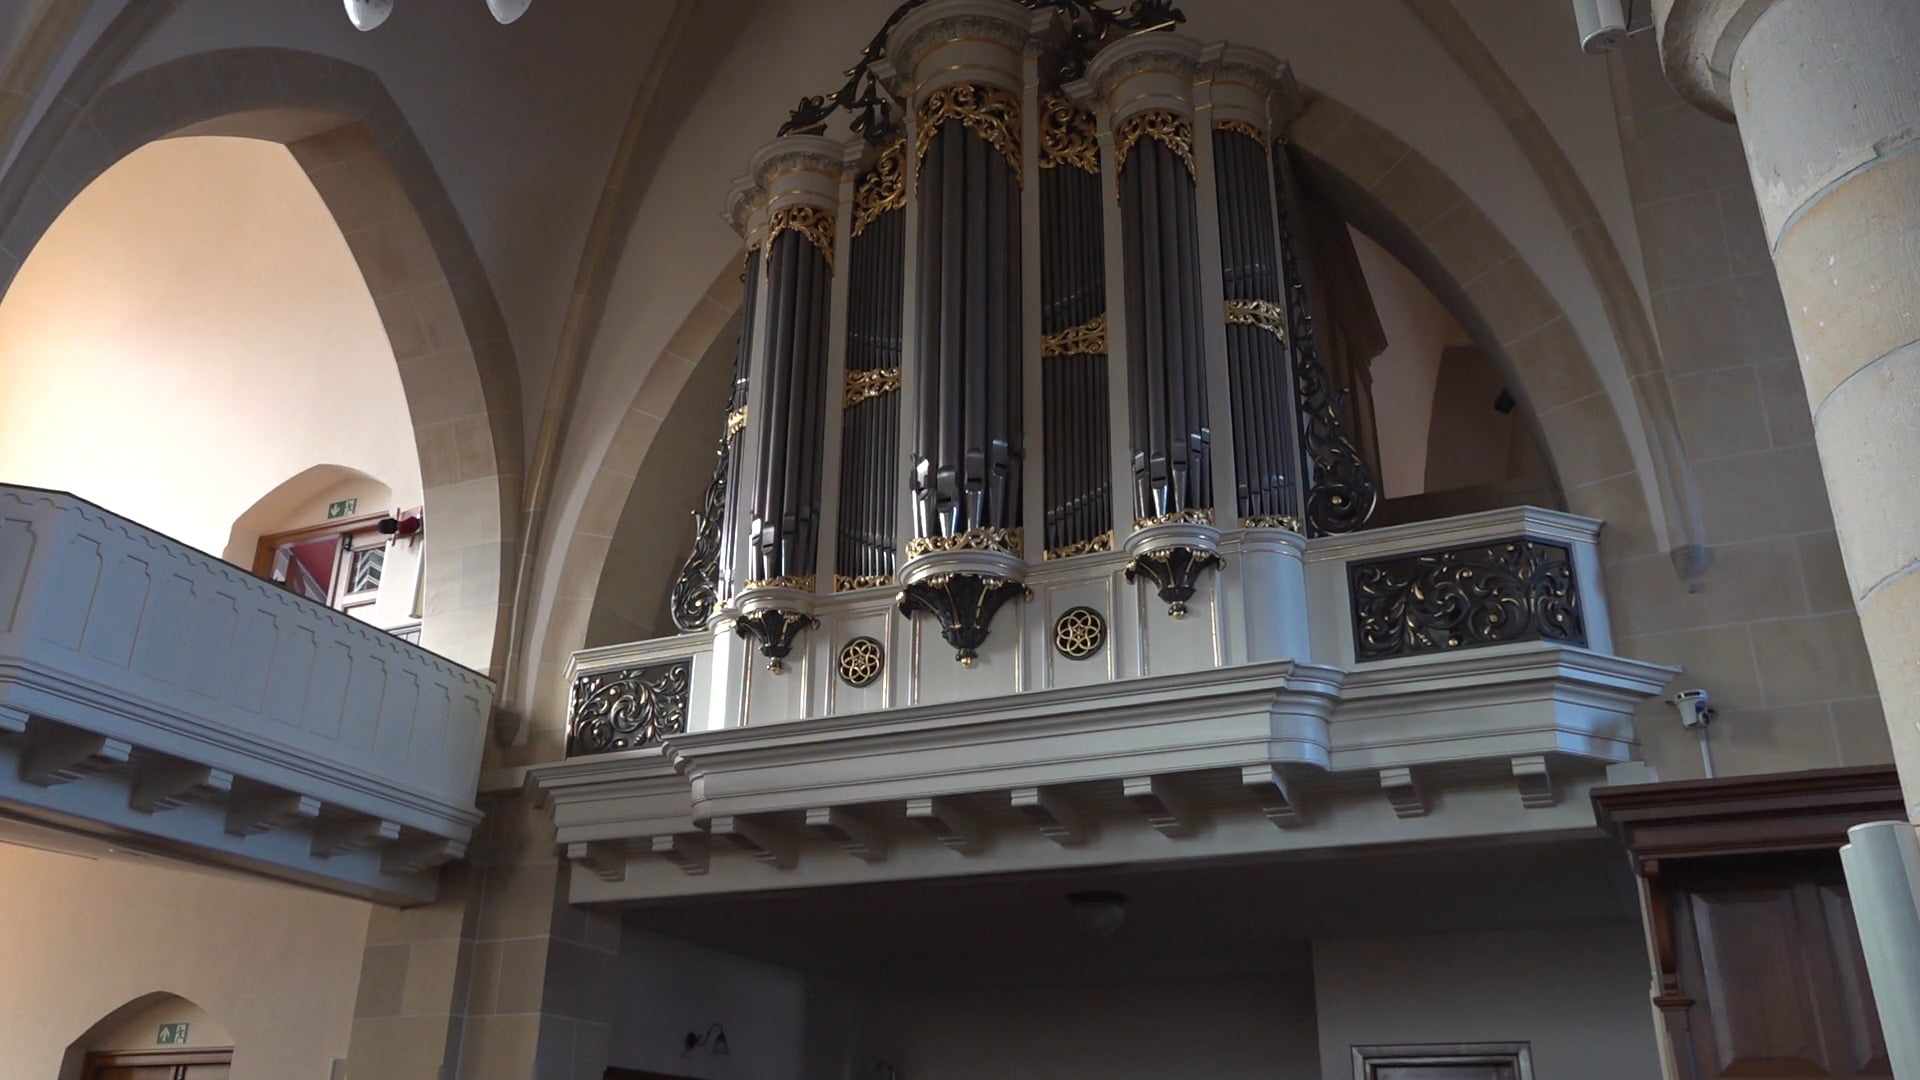 Pipe Organ: A musical instrument in the balcony inside of a church, A keyboard instrument operated by the player’s hands and feet. 1920x1080 Full HD Wallpaper.